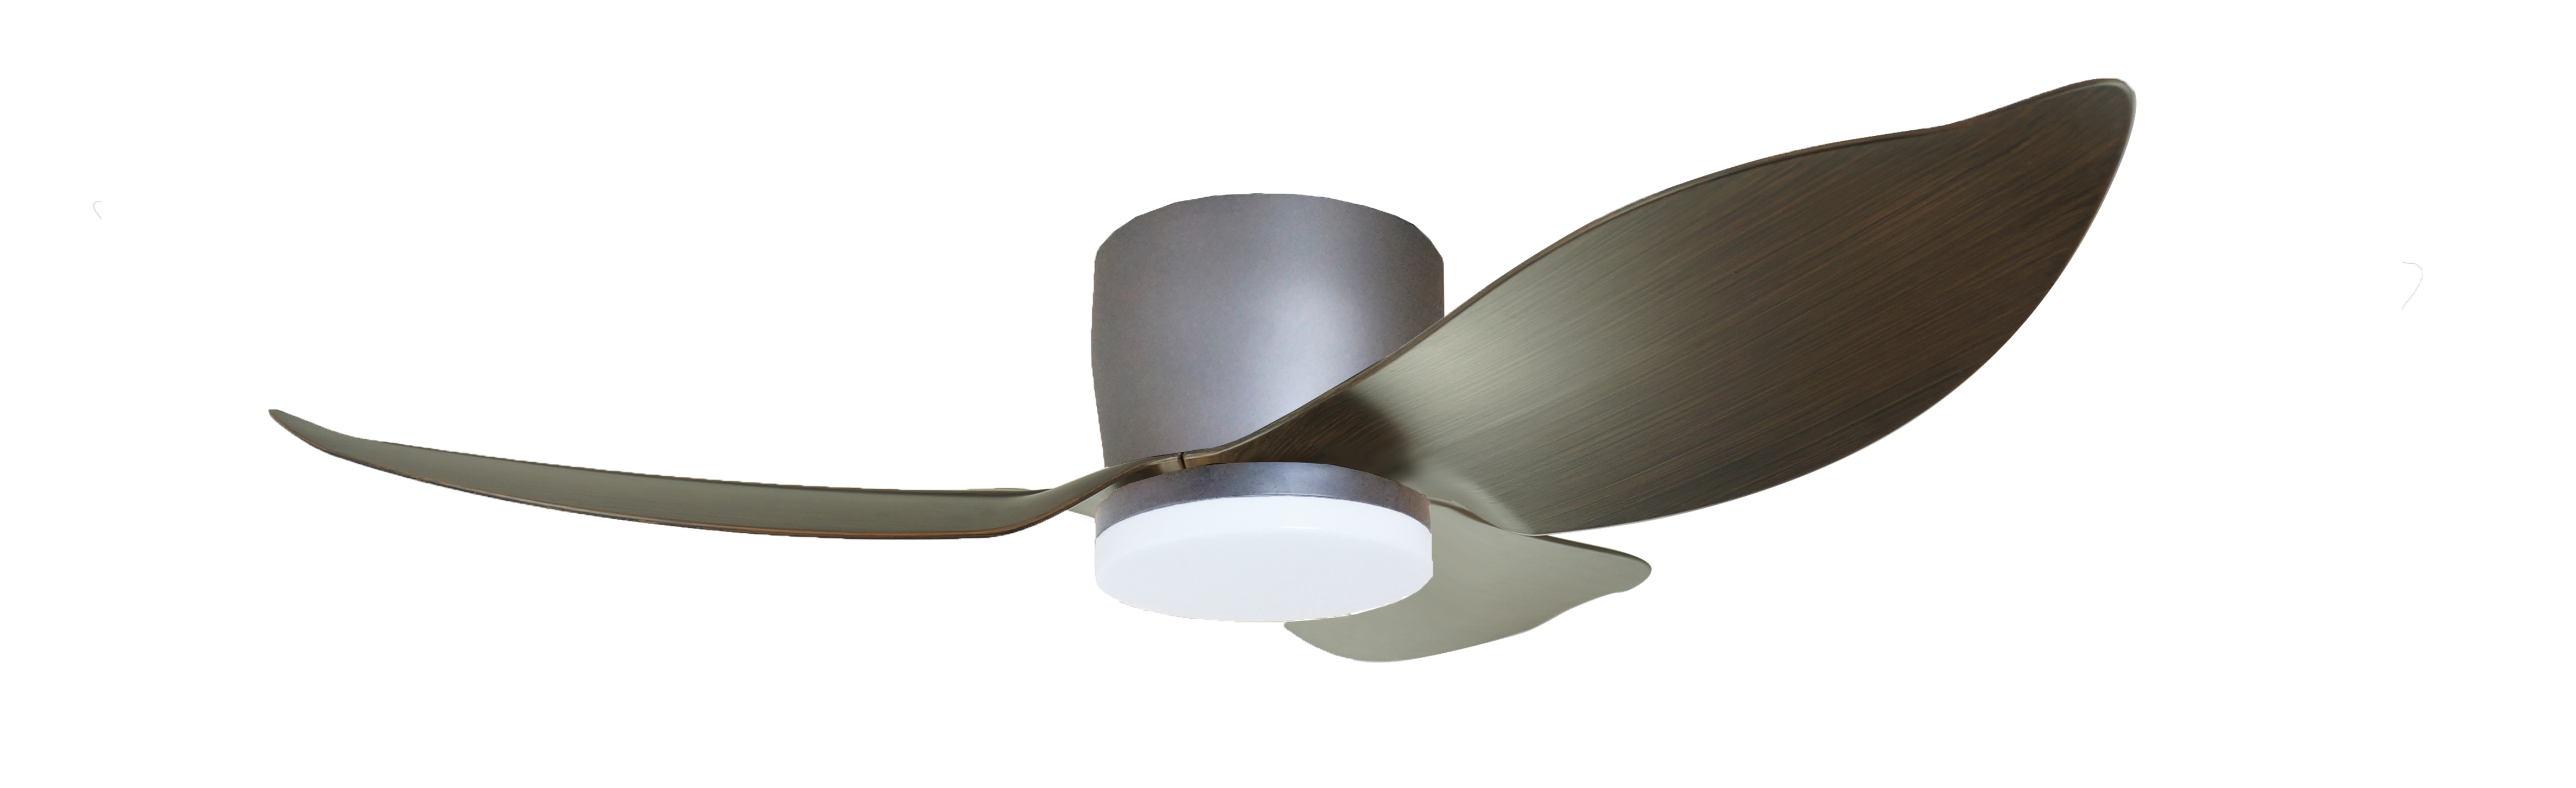 Wholesale Living Room Ceiling Fans with Lights